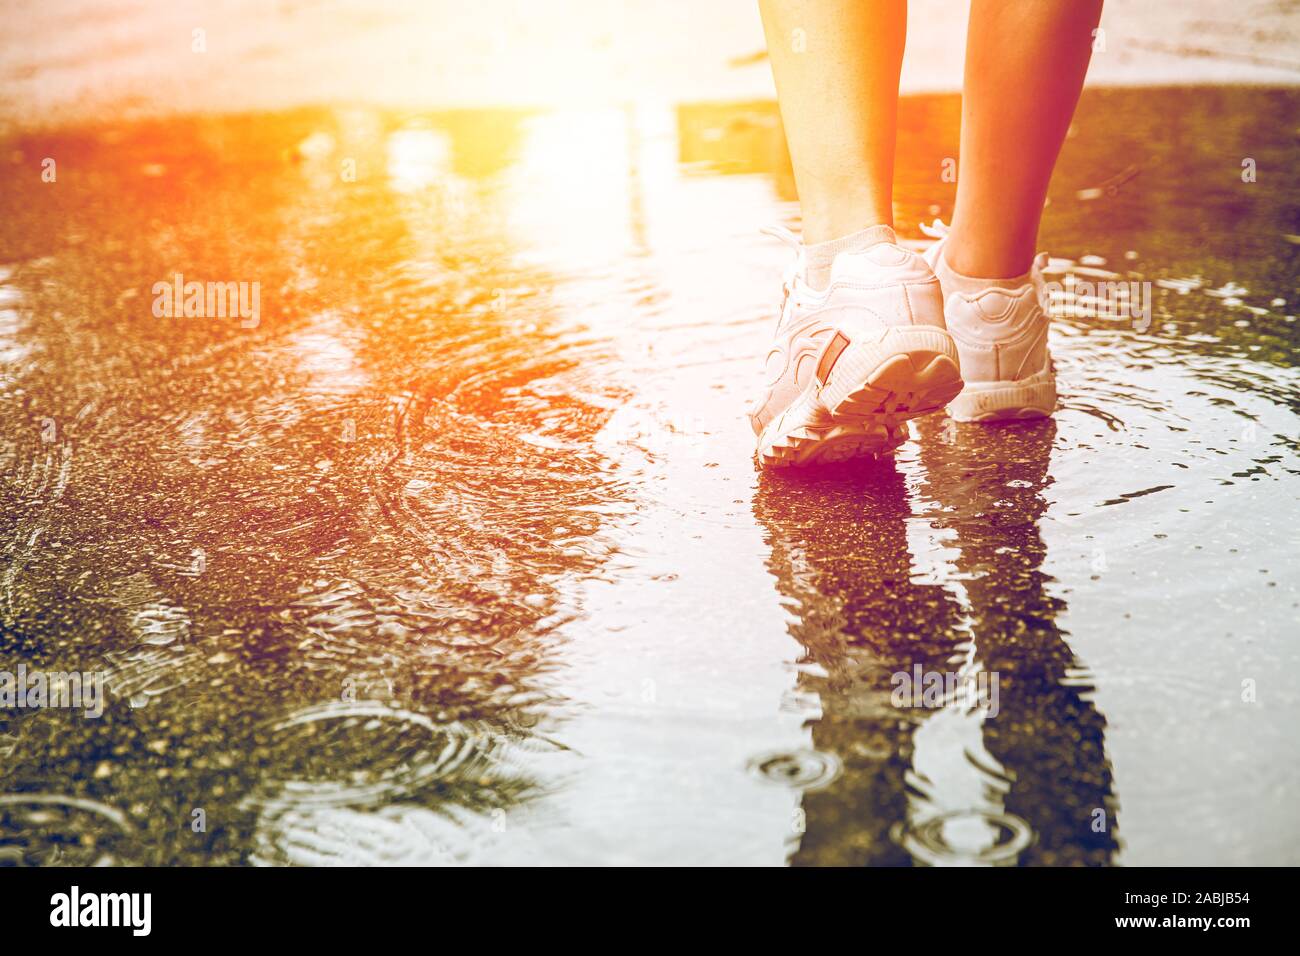 Closeup feet walking in water at the ground after rain for step over obstacles in life to next good thing strong with no fear. Stock Photo